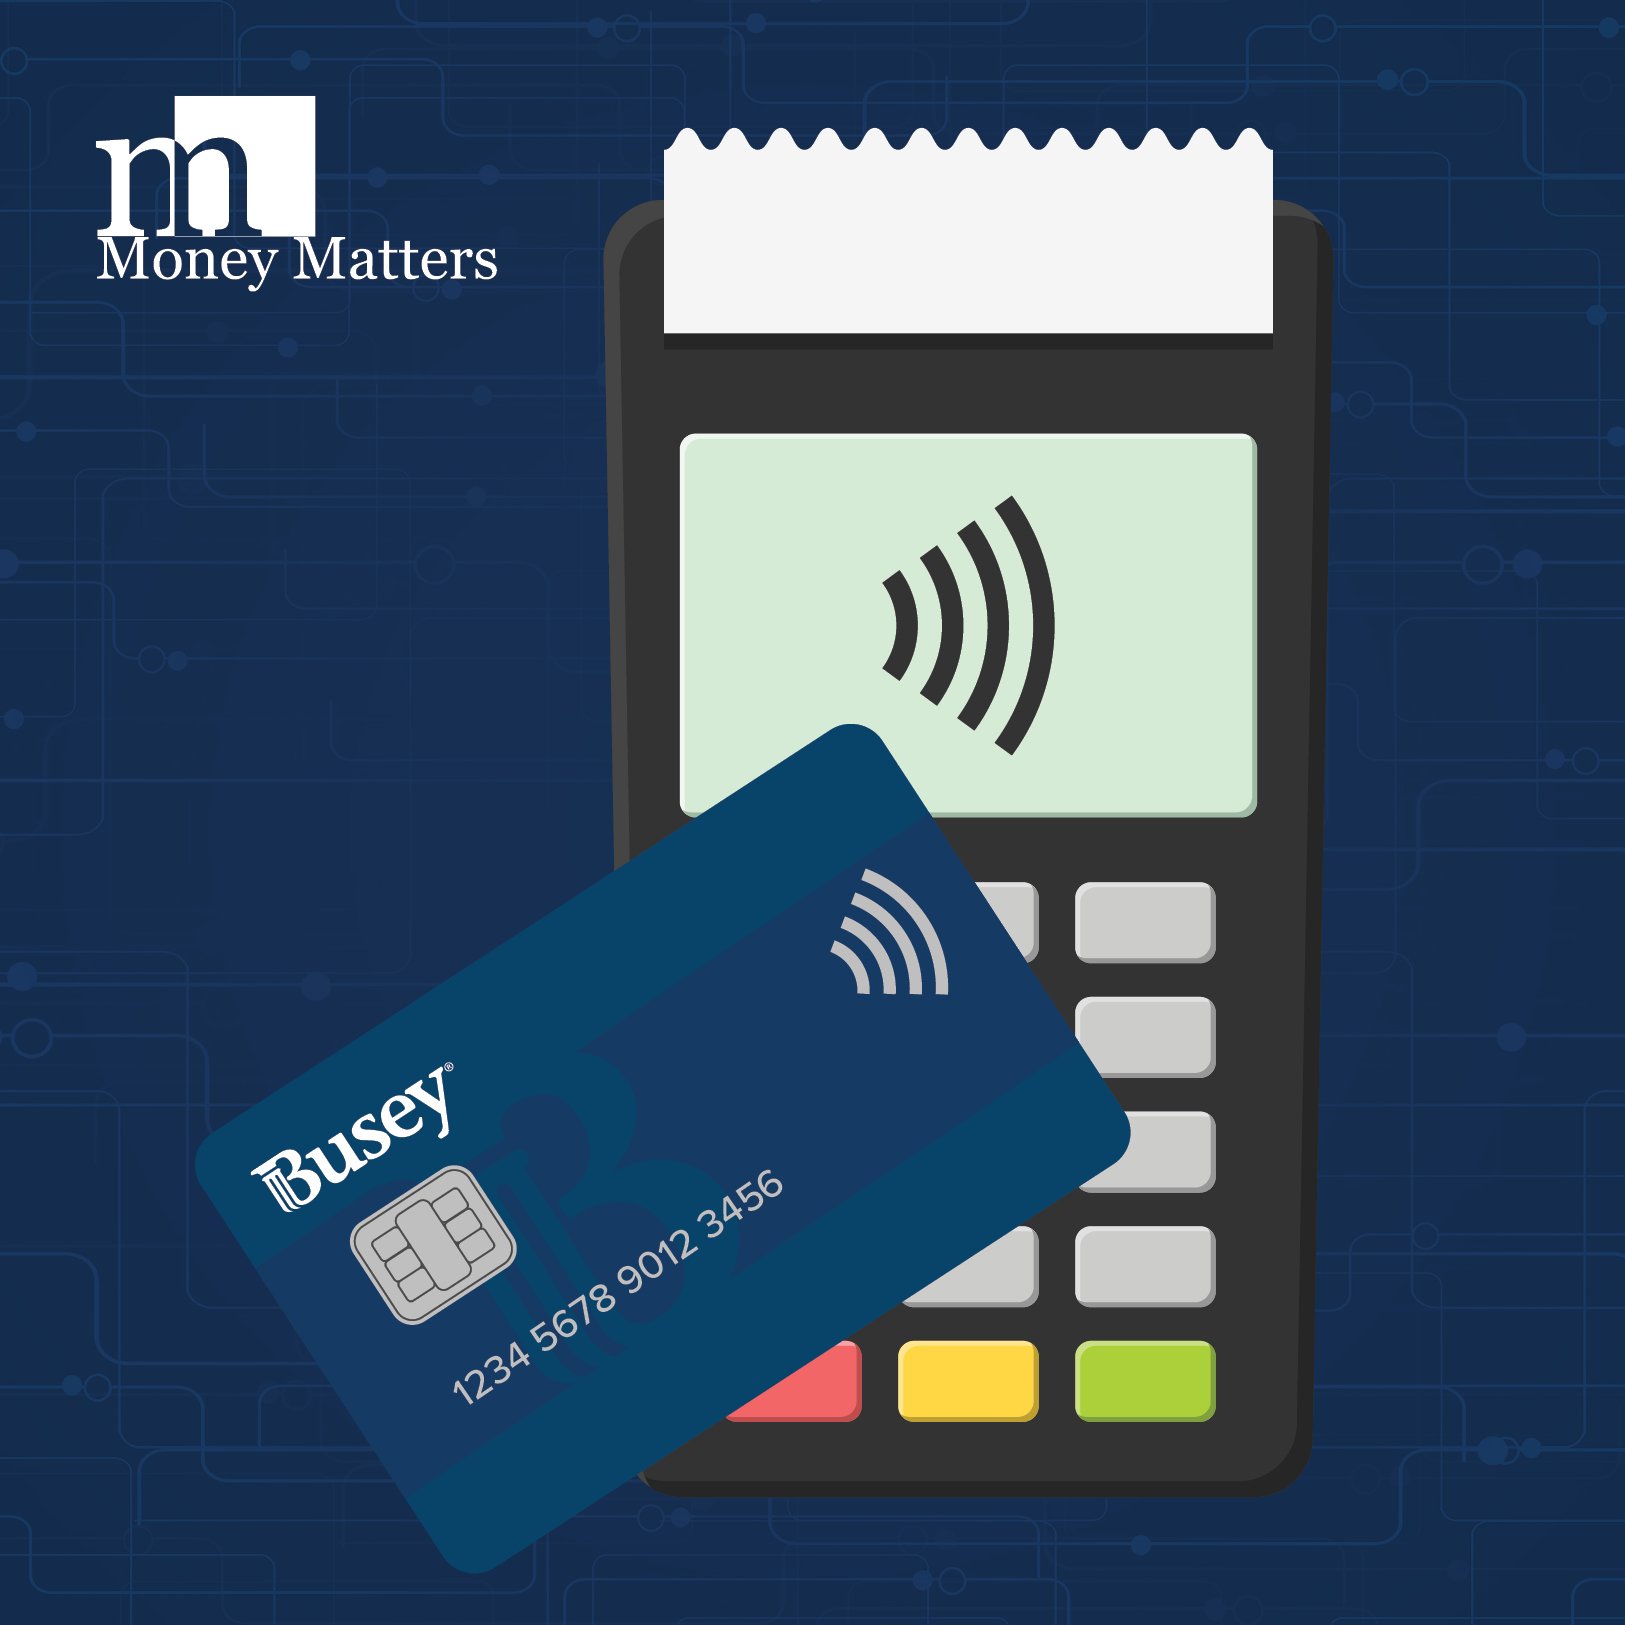 A graphic image of a debit card and a transaction machine.